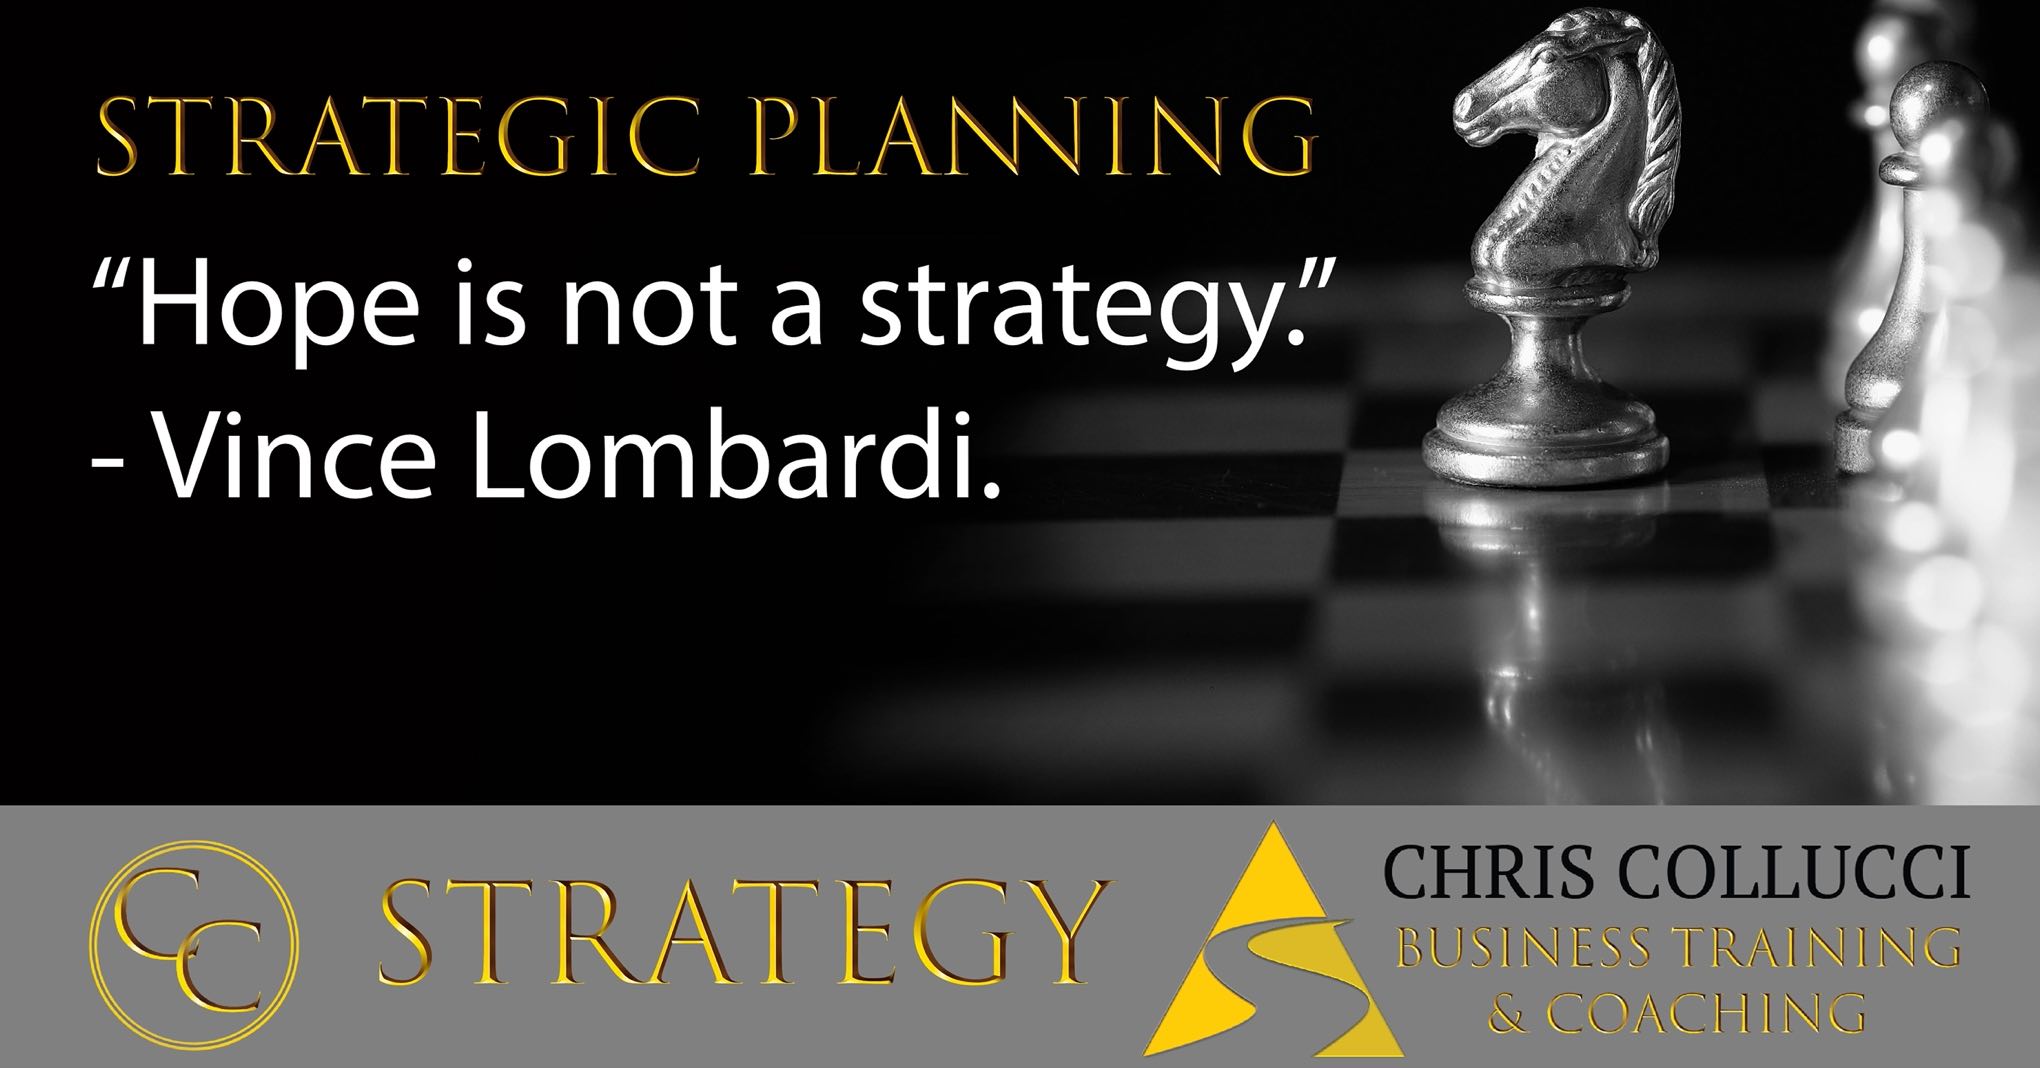 inspirational quote from Vince Lombardi hope is not a strategy